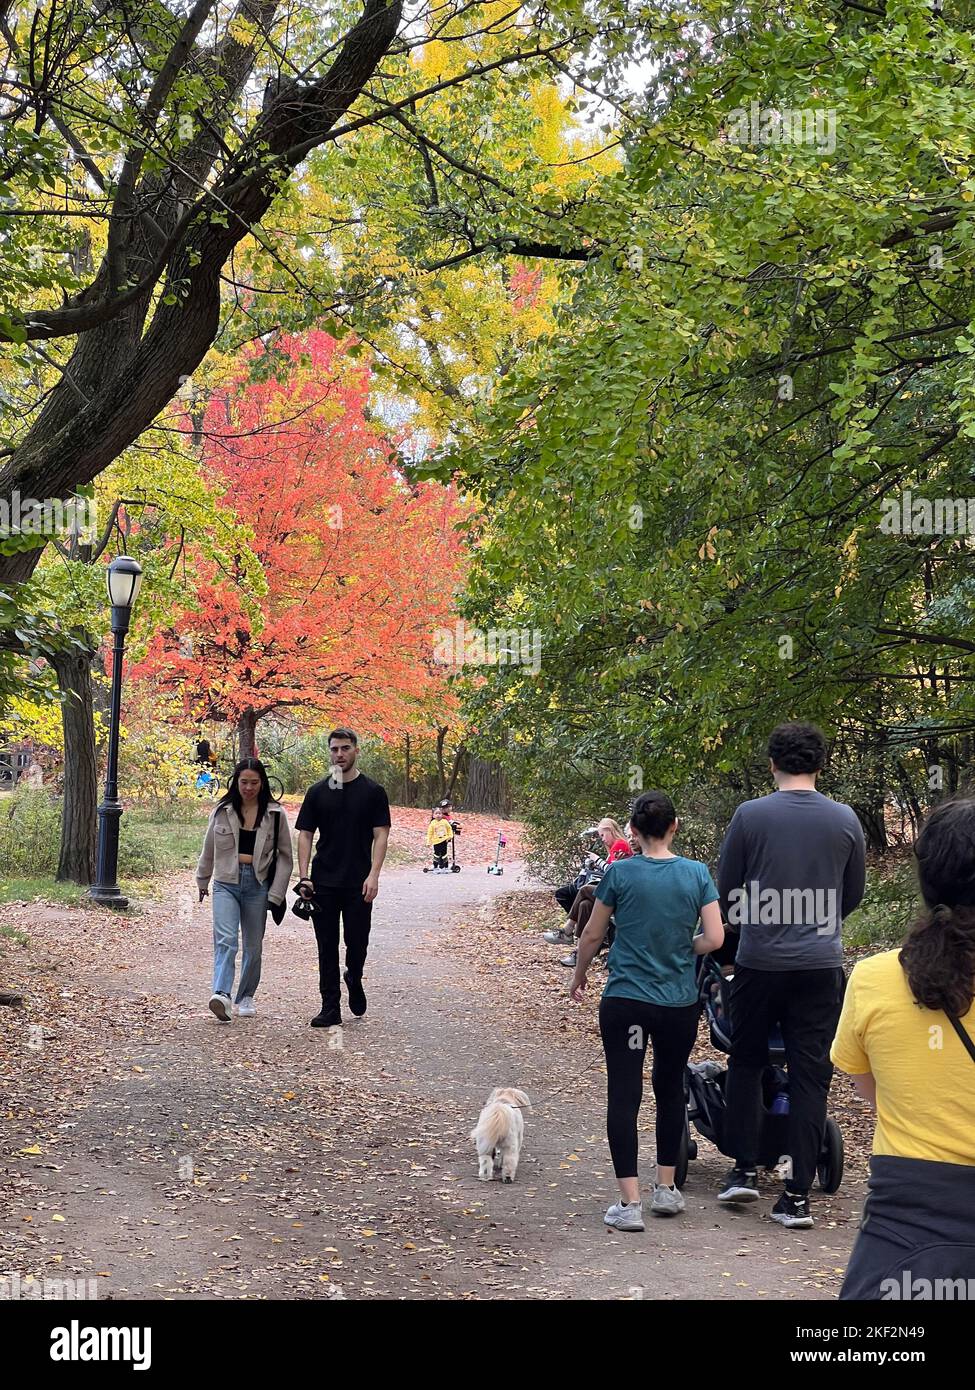 People enjoy a warm autumn day amidst   the beautiful fall colors in Prospect Park, Brooklyn, New York. Stock Photo